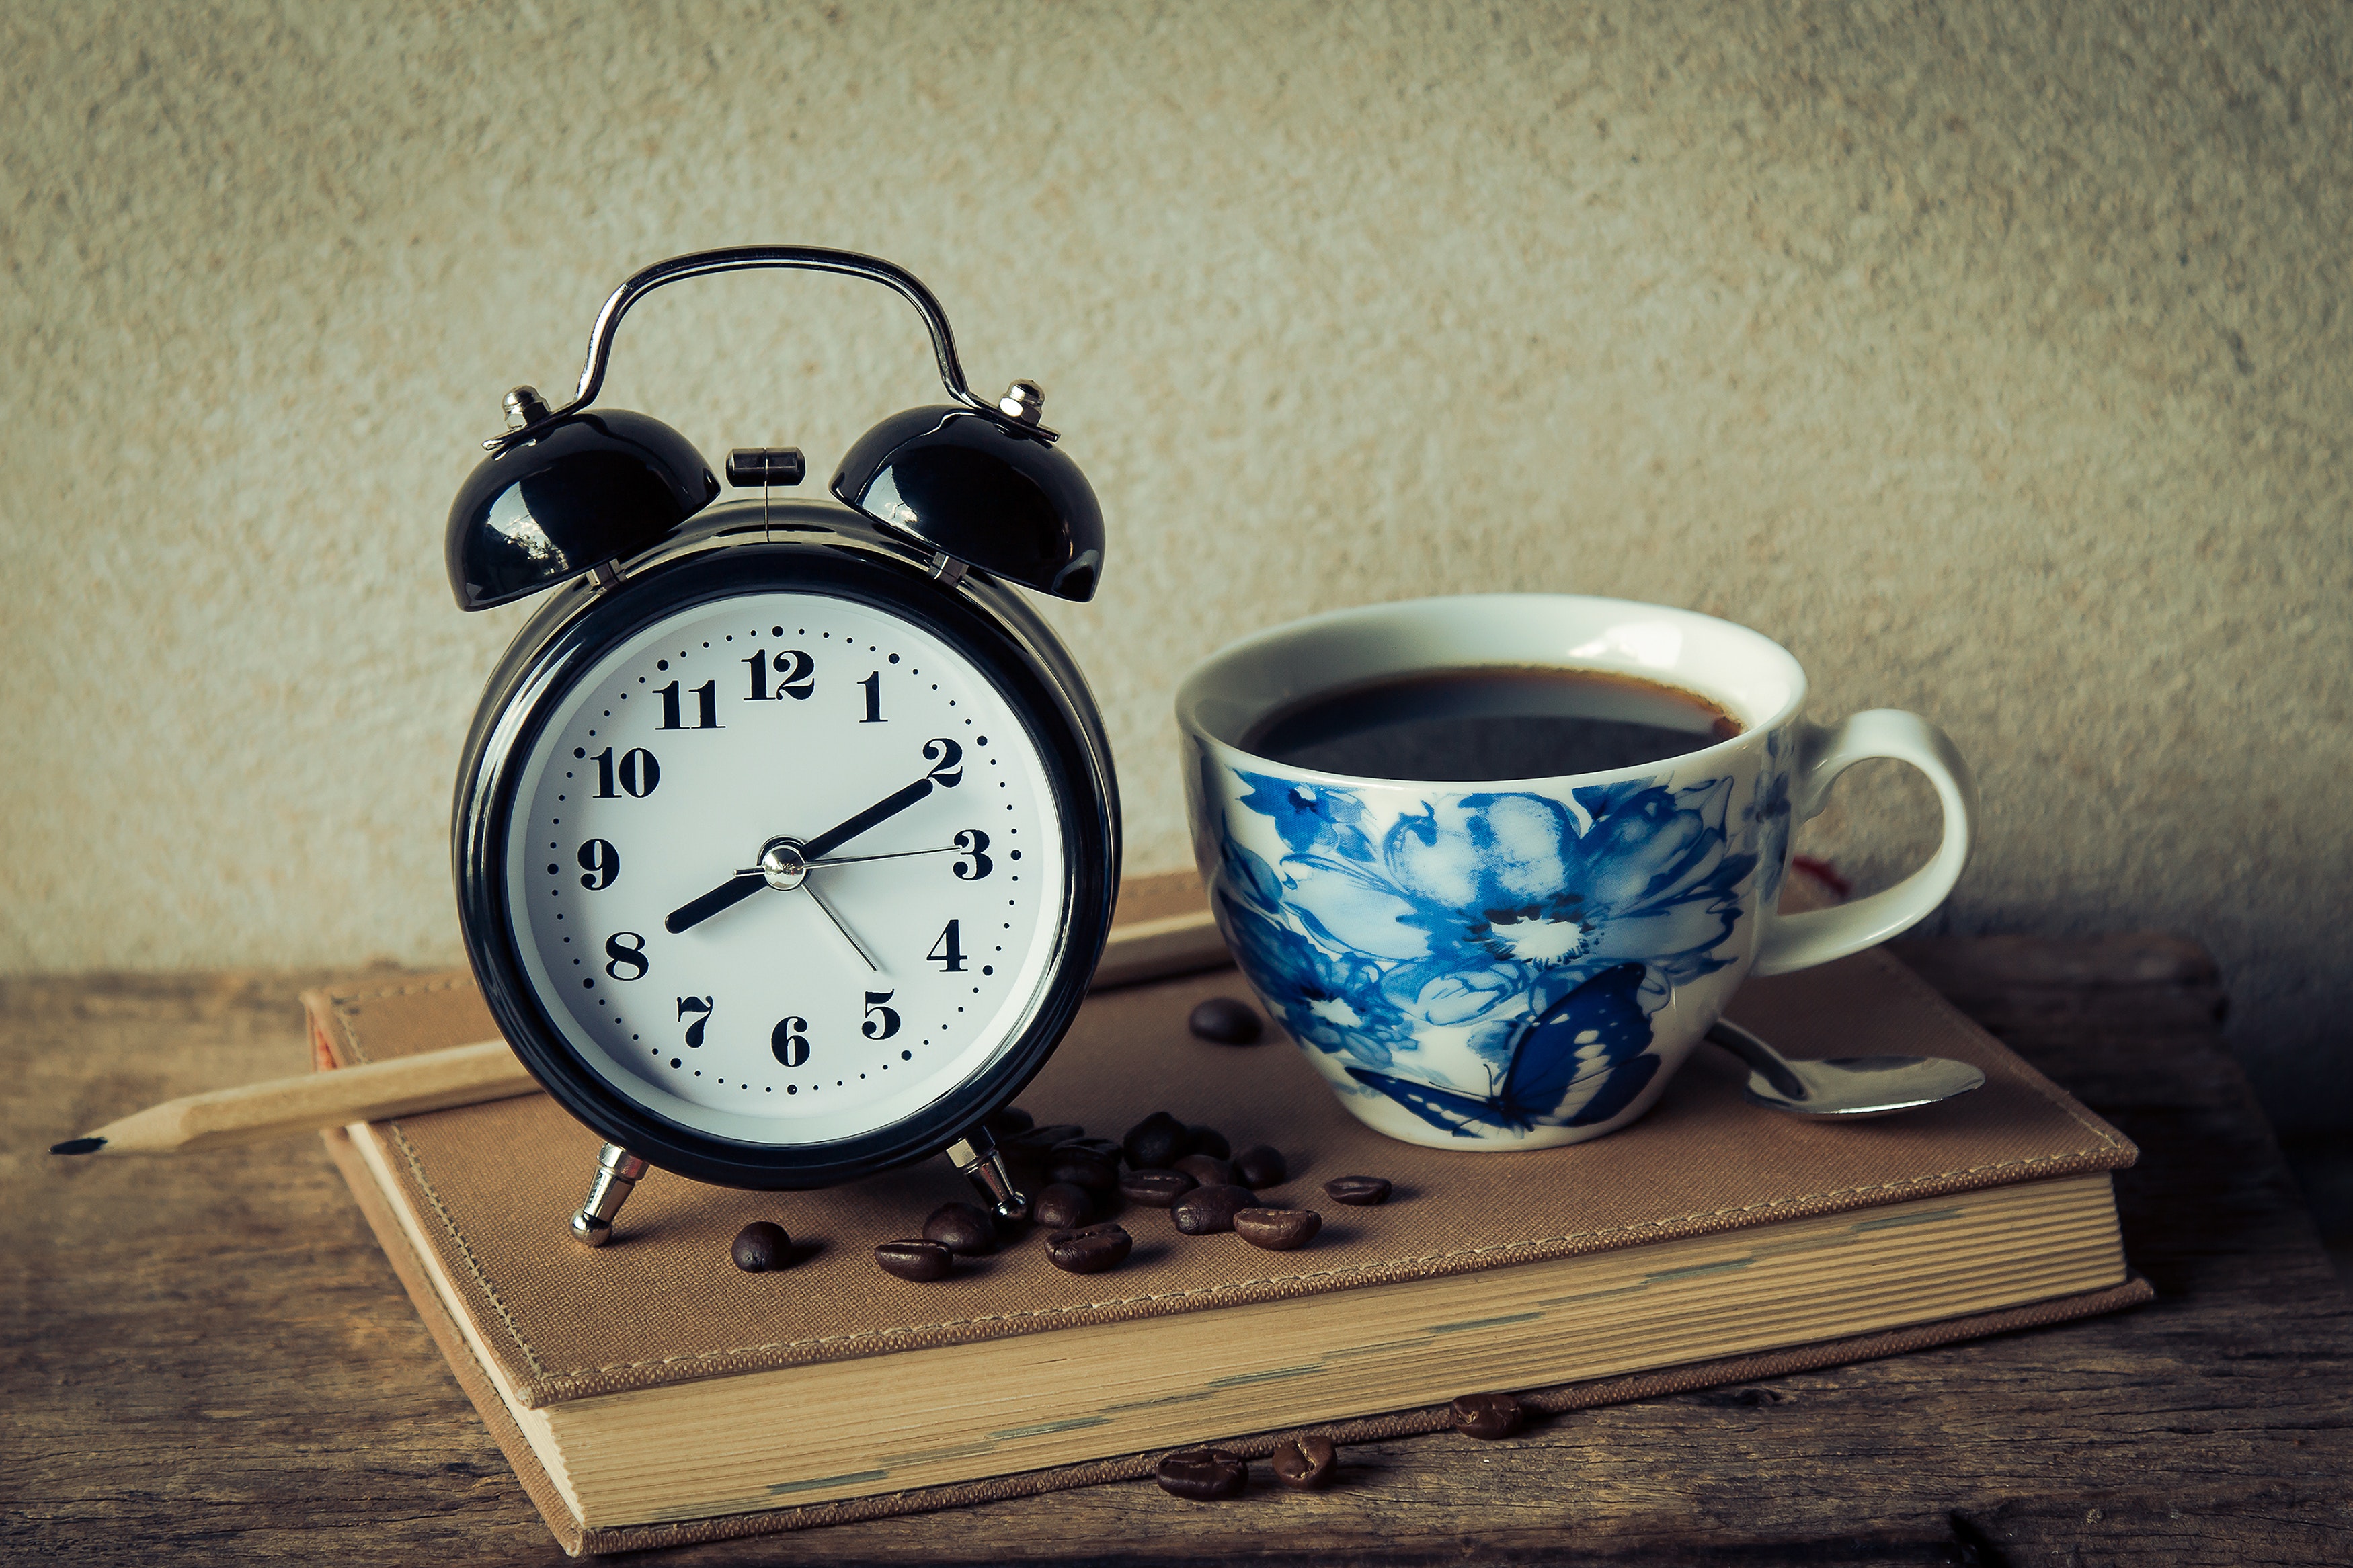 Clock and coffee cup